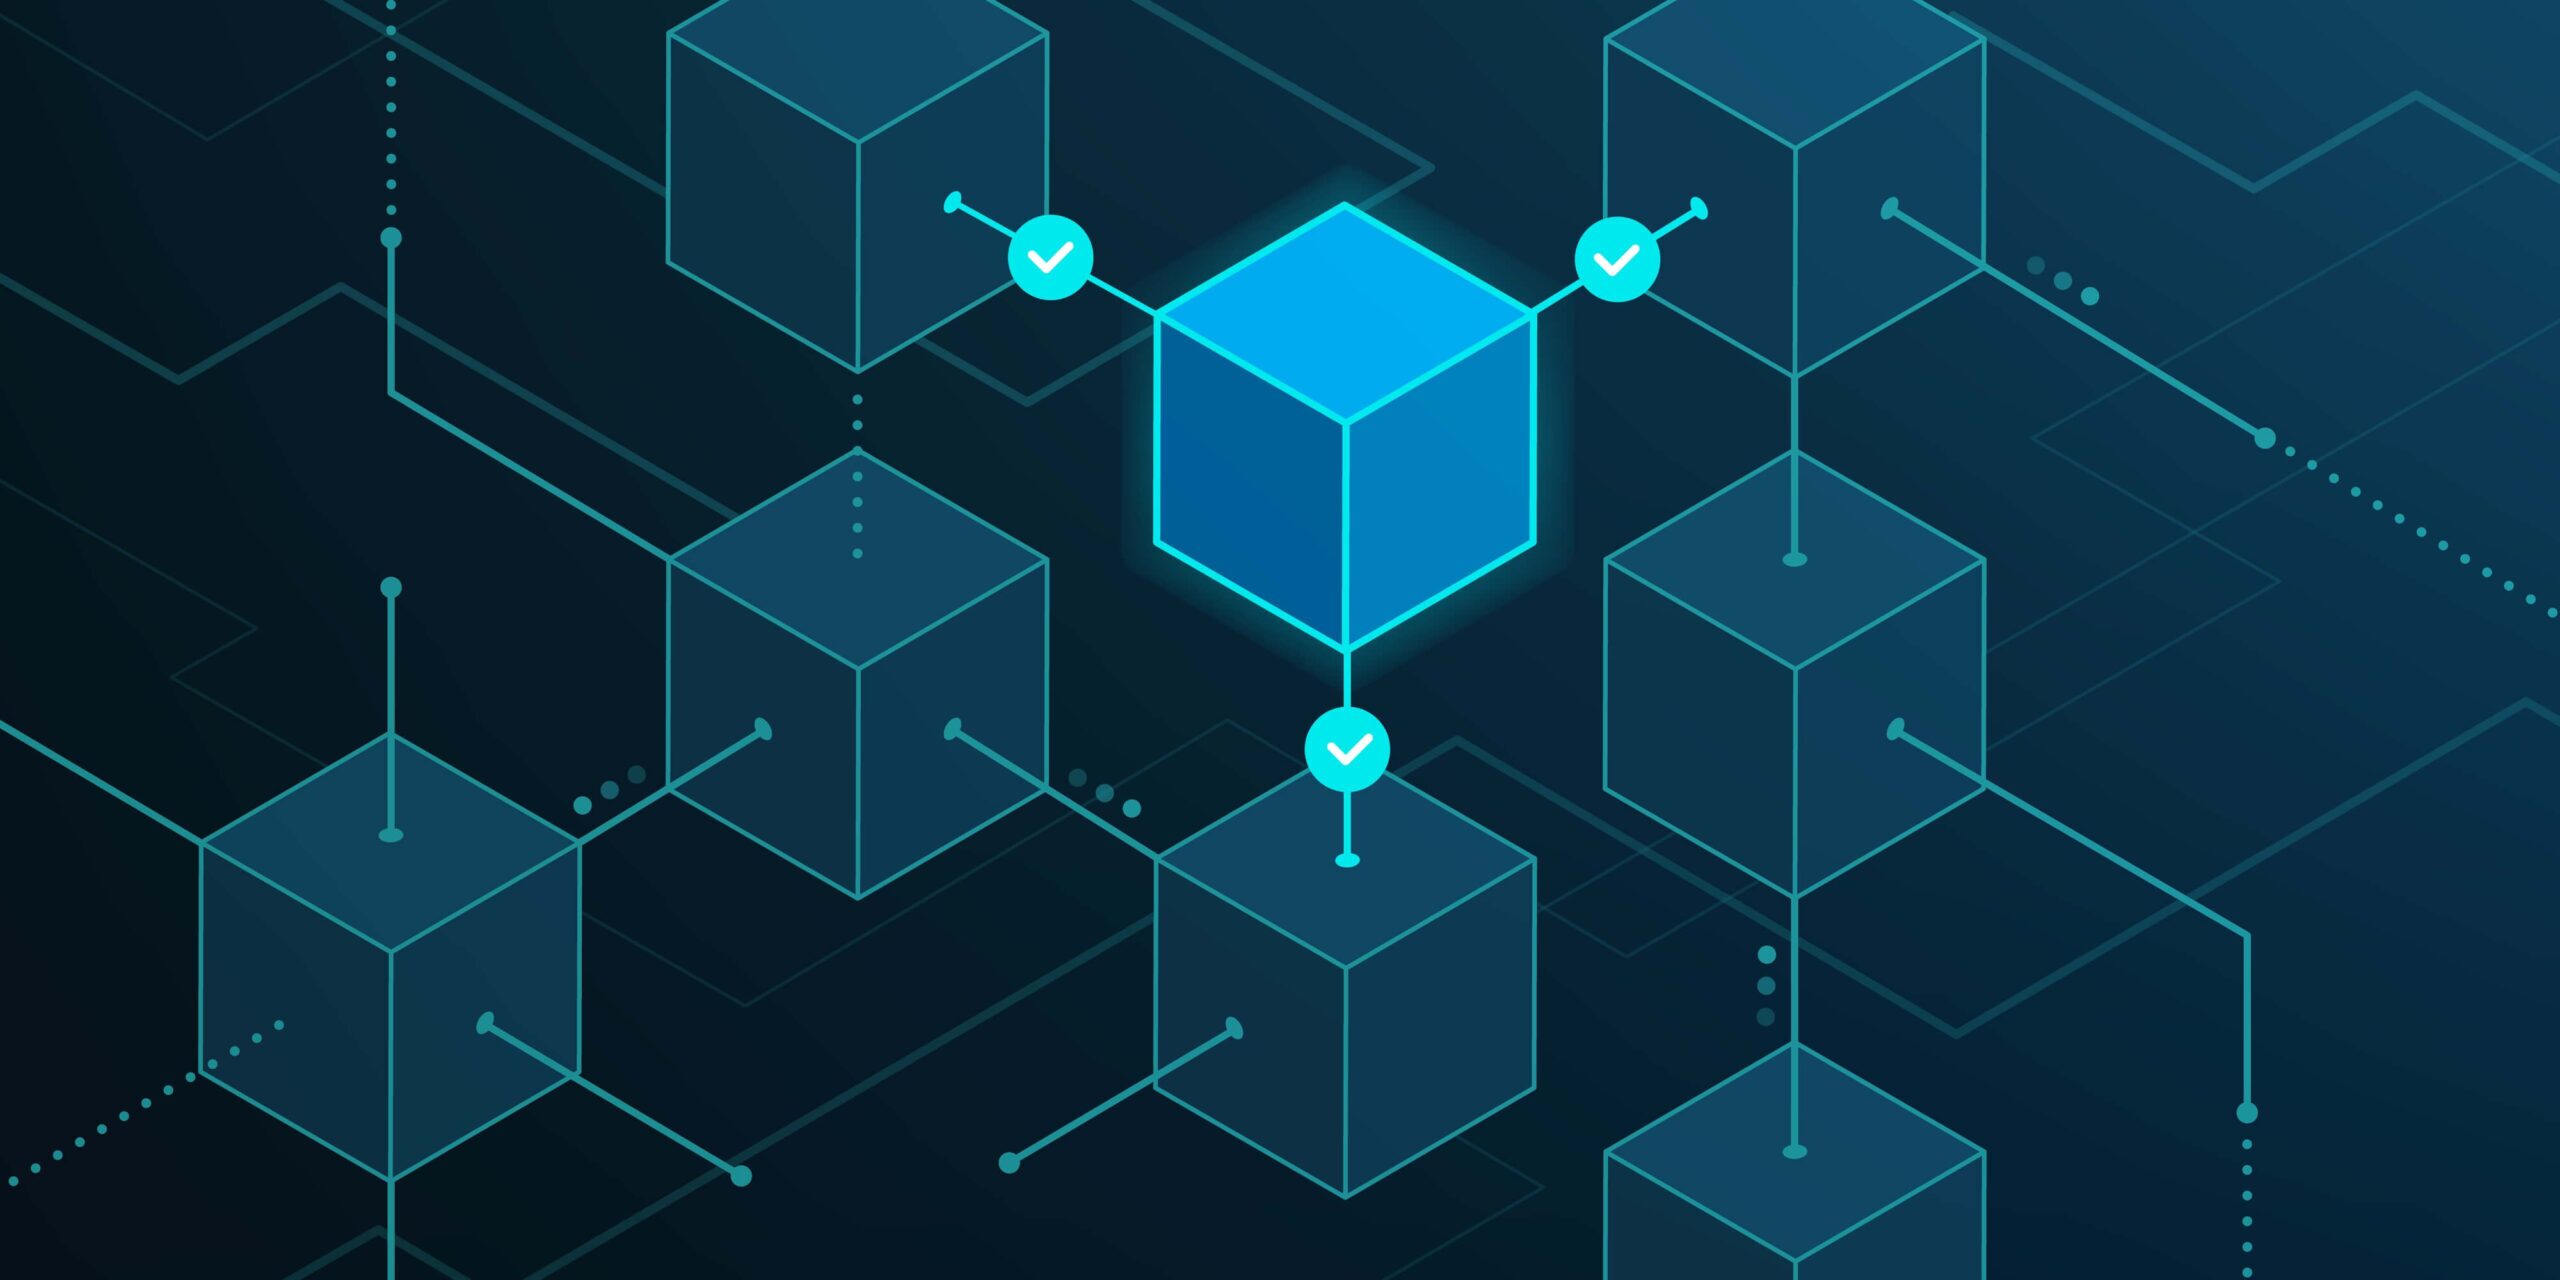 Illustration of an interconnected block to depict a blockchain network.